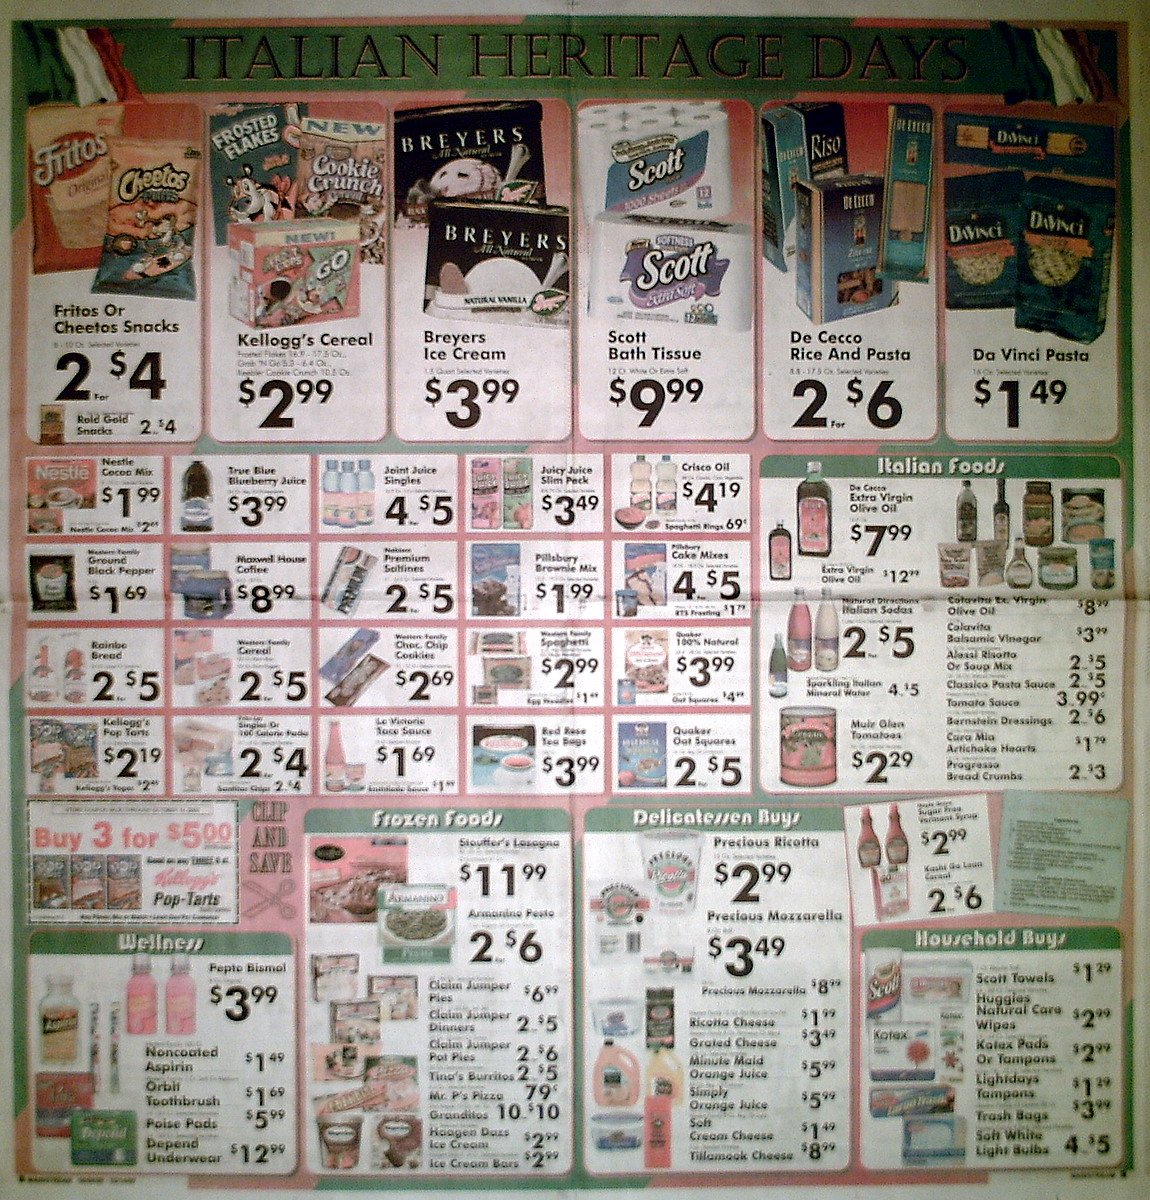 Big Trees Market Weekly Grocery Ad for October 8 - 14 2008